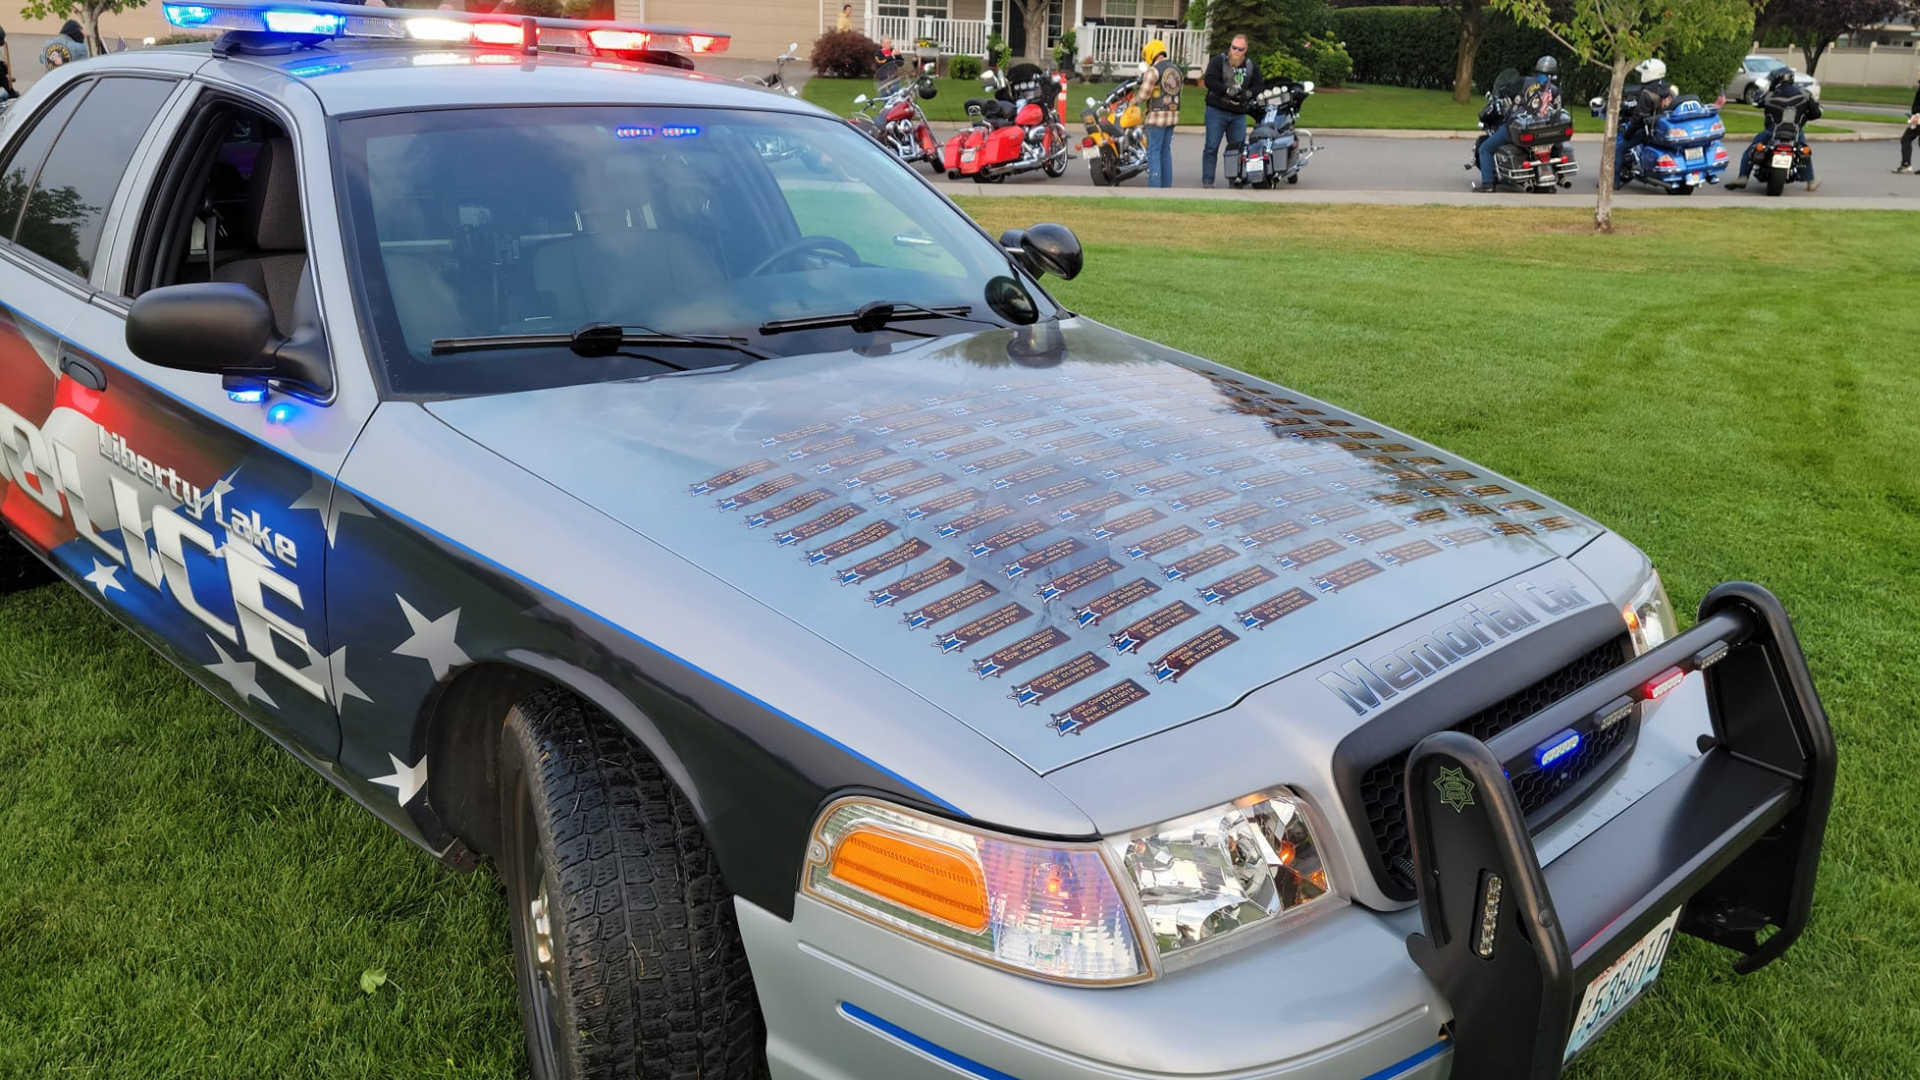 Image of a police car from Liberty Lake Police with emergency lights on, parked on grass, displaying a hood covered with memorial plaques at dusk.